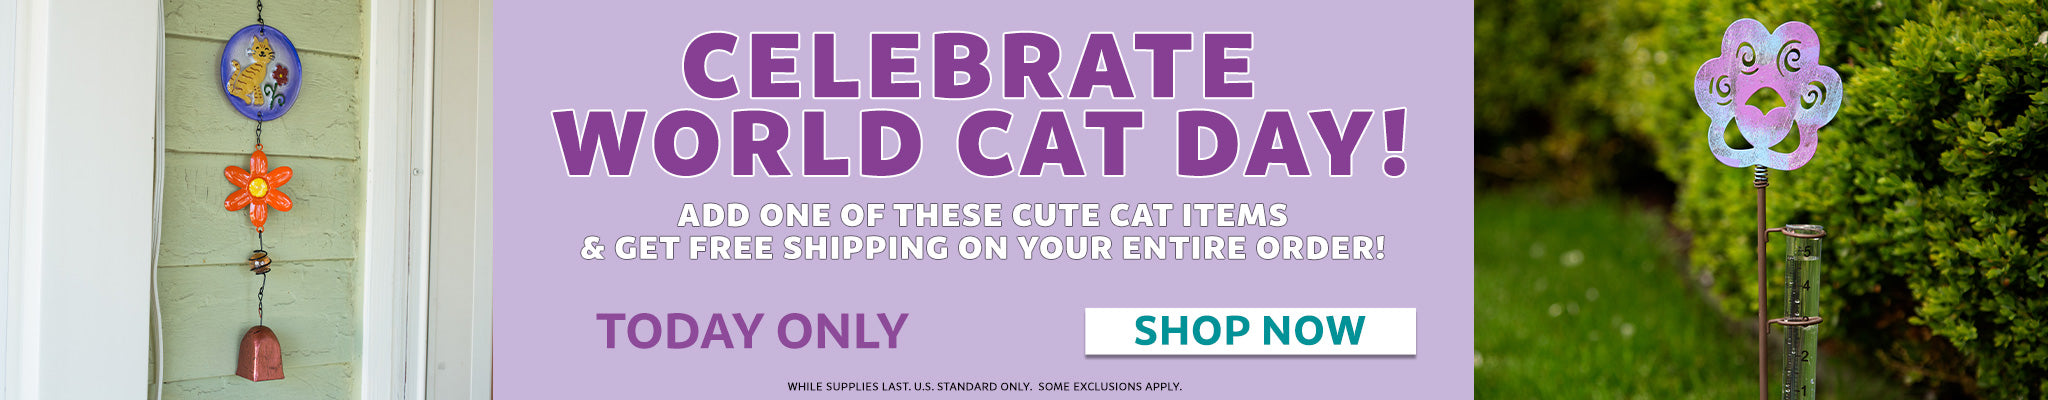 Celebrate World Cat Day! | Add one of these cute cat items and get free shipping on your entire order! | Today Only! | Shop Now!